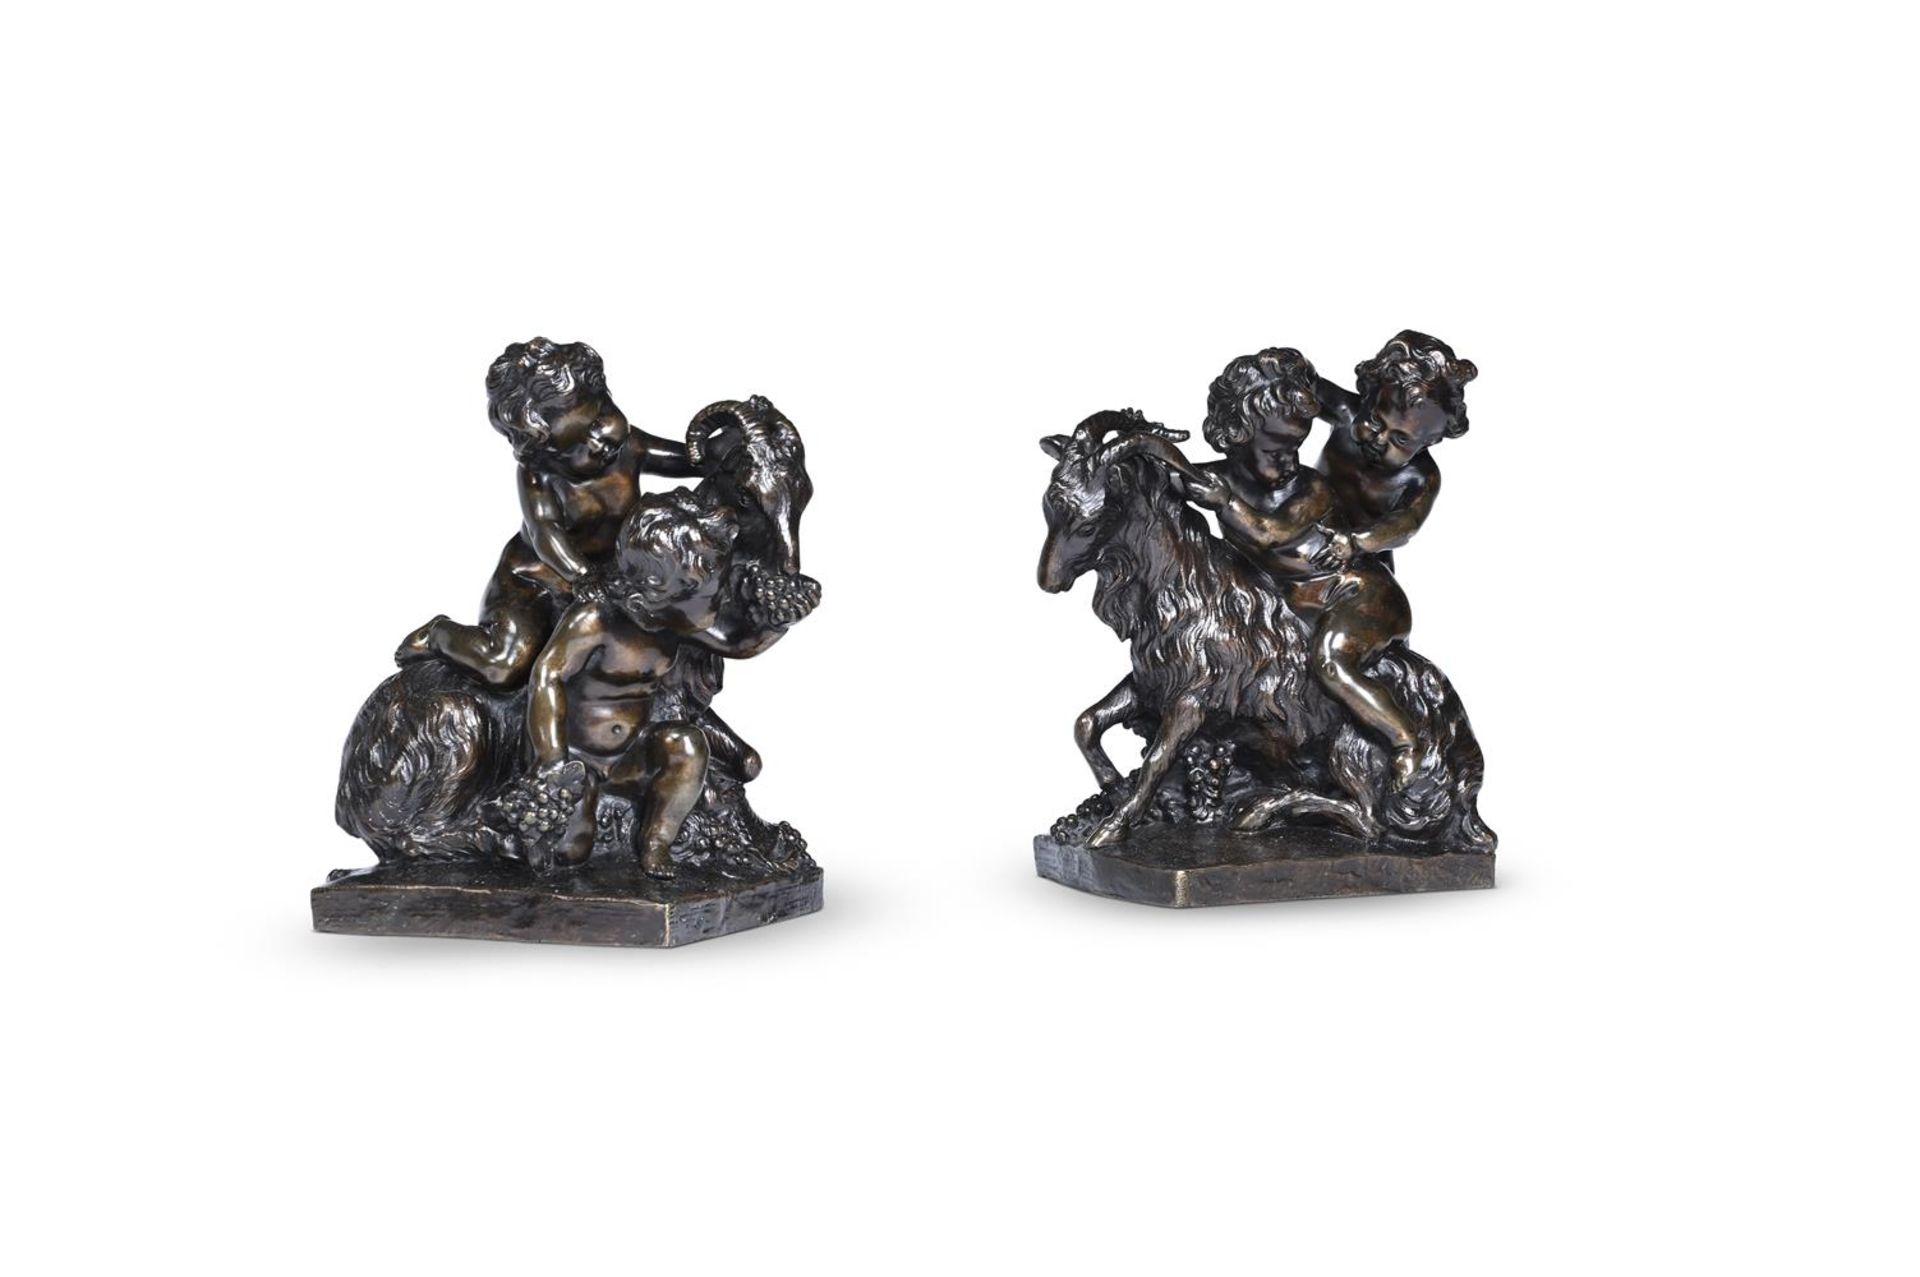 A PAIR OF FRENCH BRONZE CHERUB GROUPS, IN THE MANNER OF CLODION, 19TH CENTURY